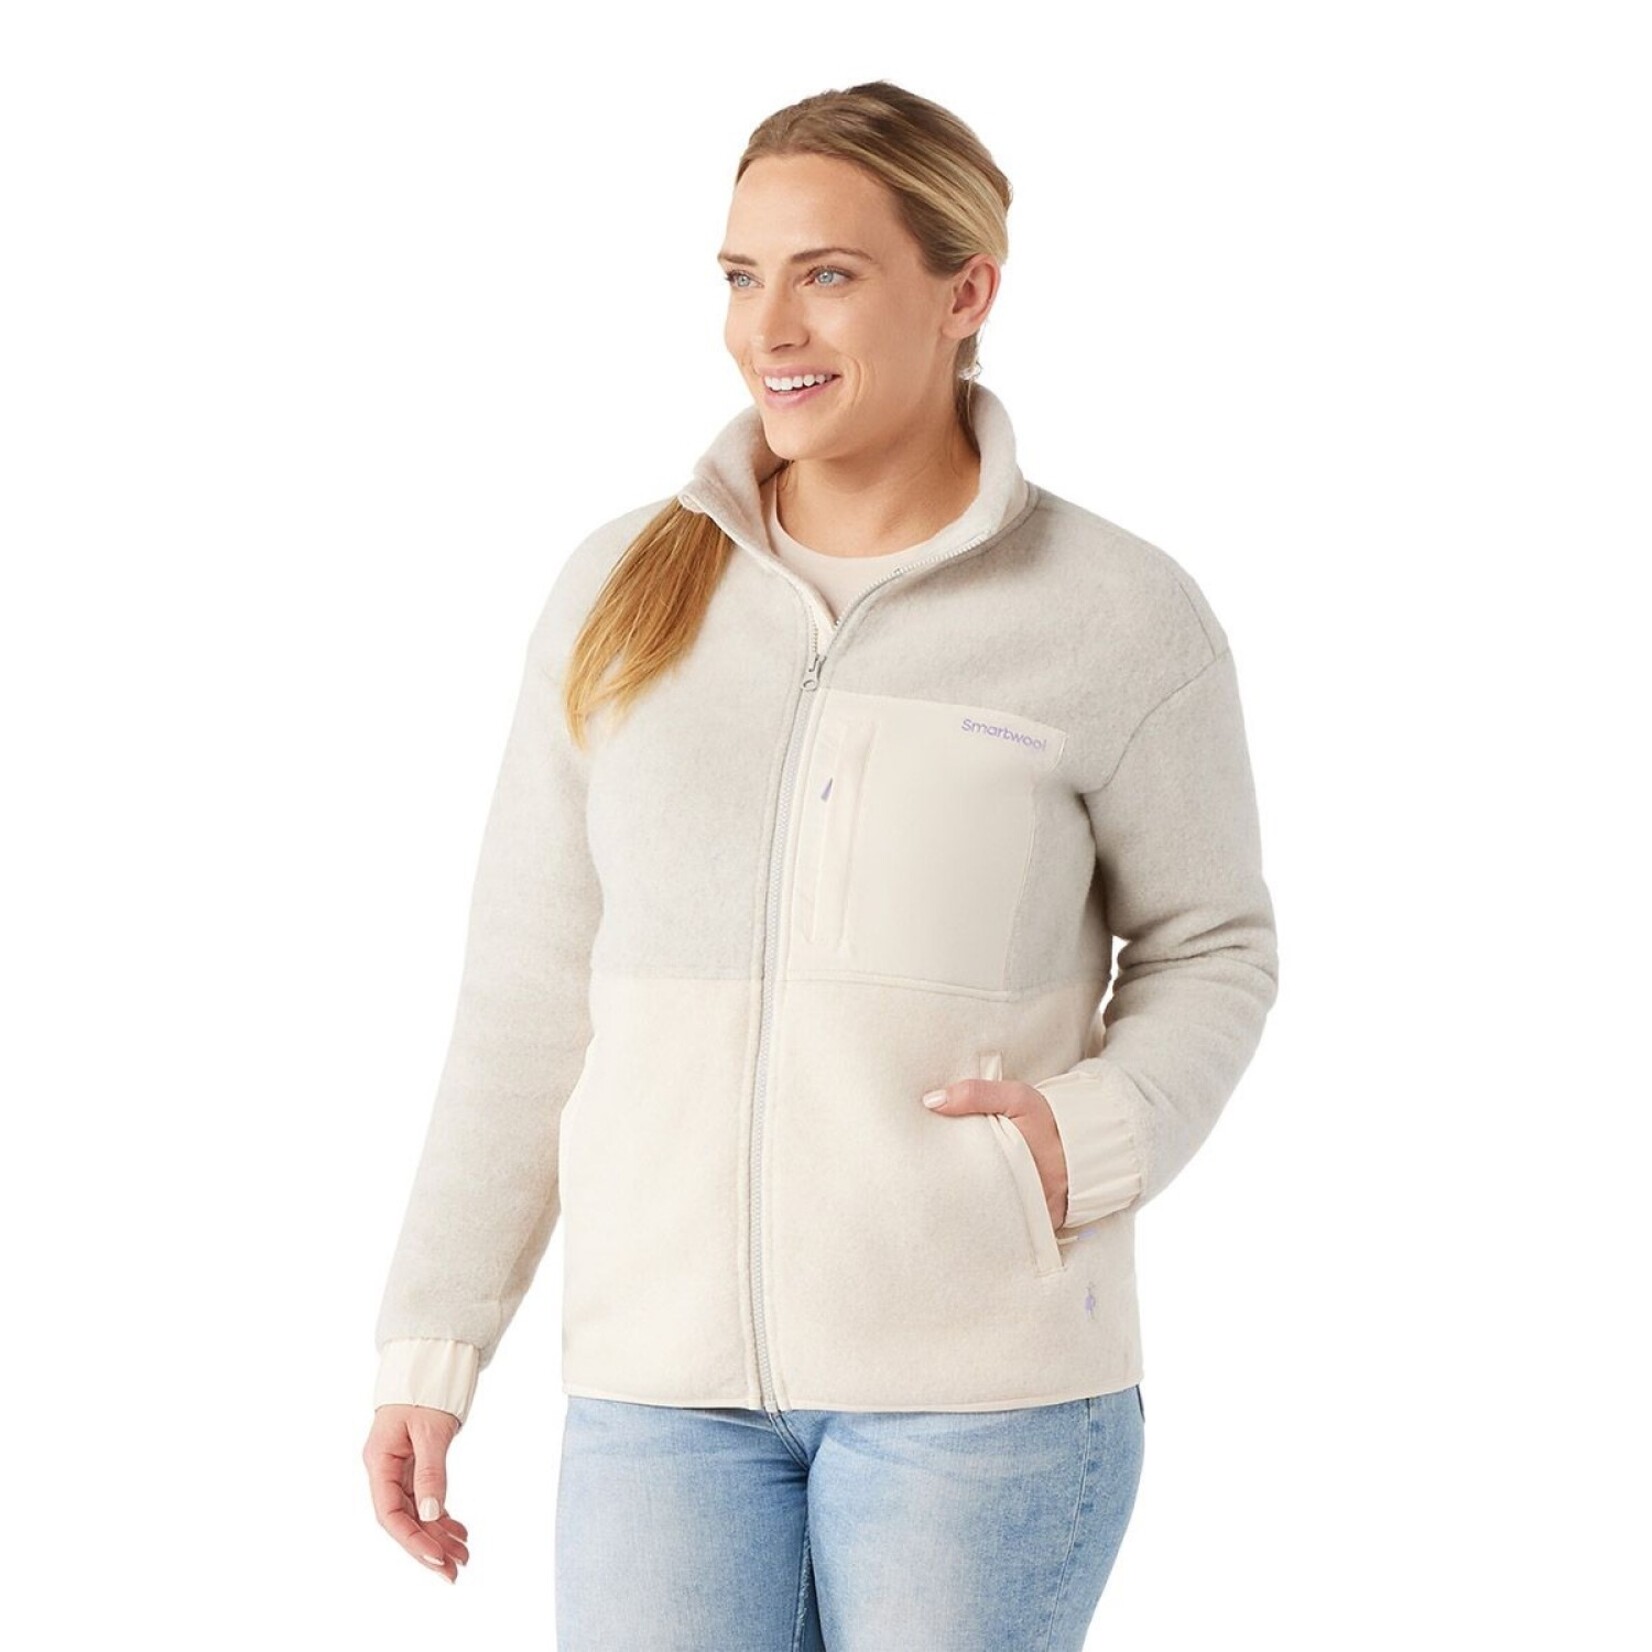 Better Sweater Fleece Jacket Review: A cozy classic - Reviewed